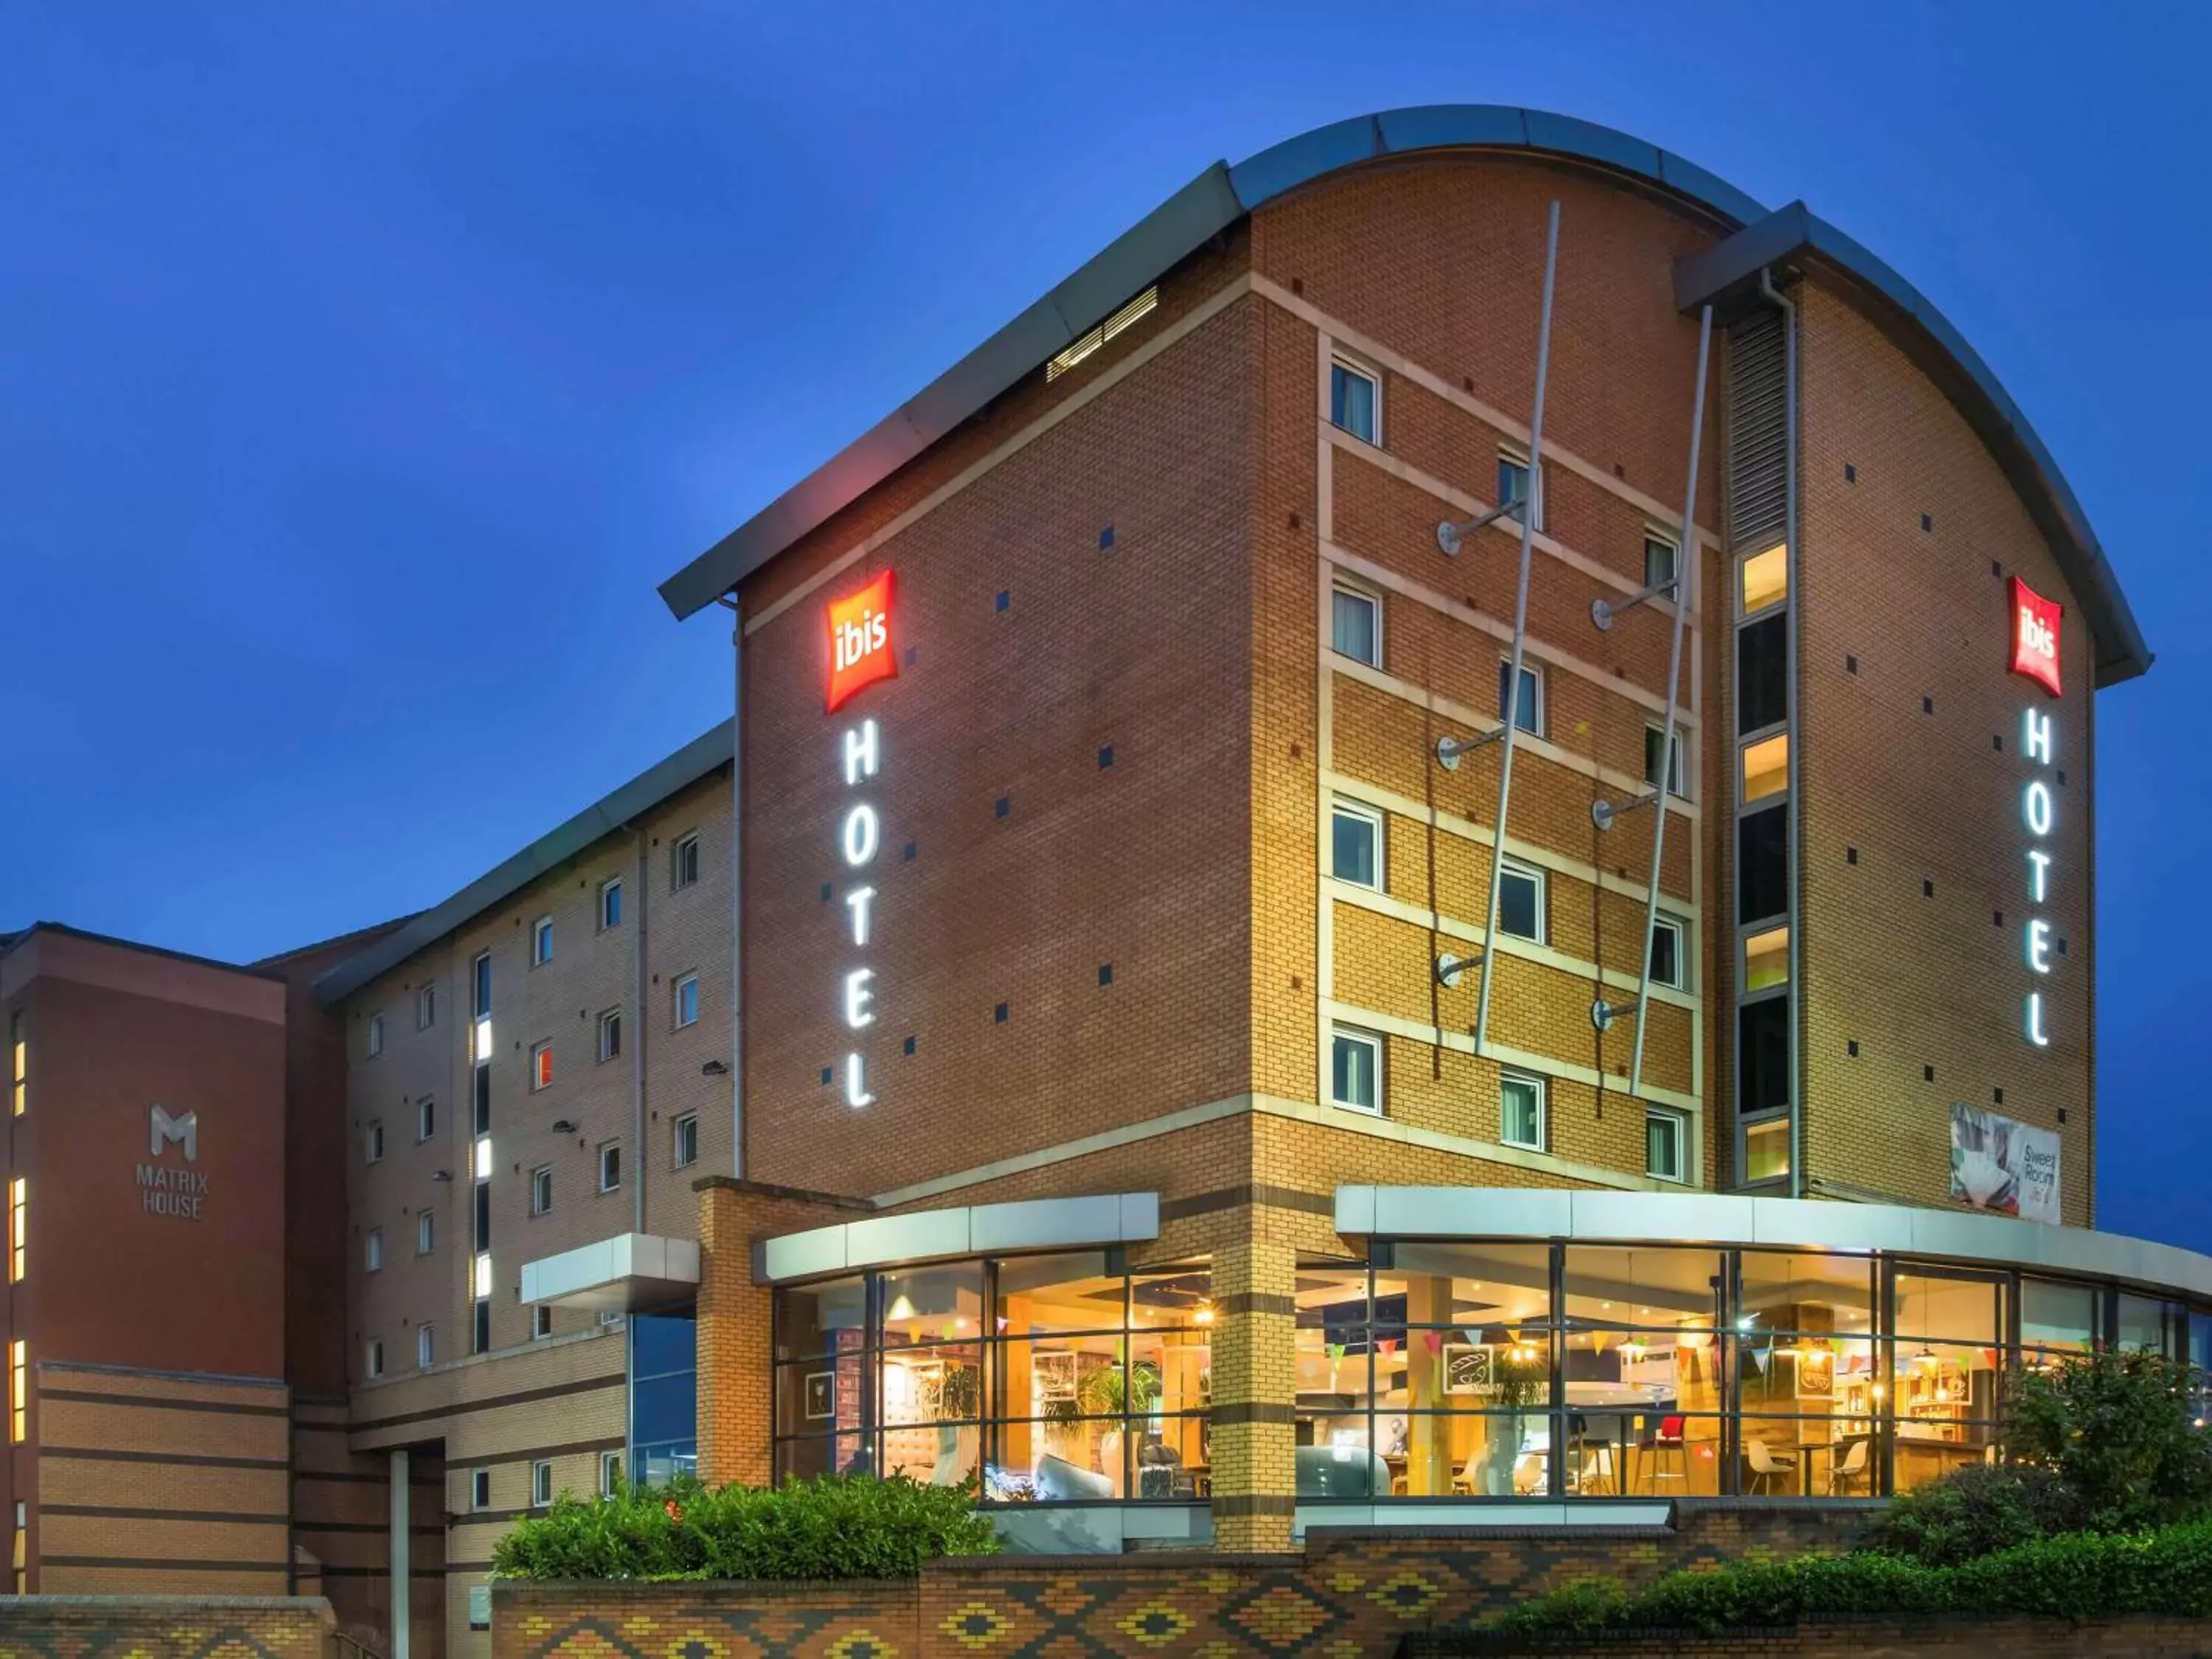 Property Building in ibis Leicester